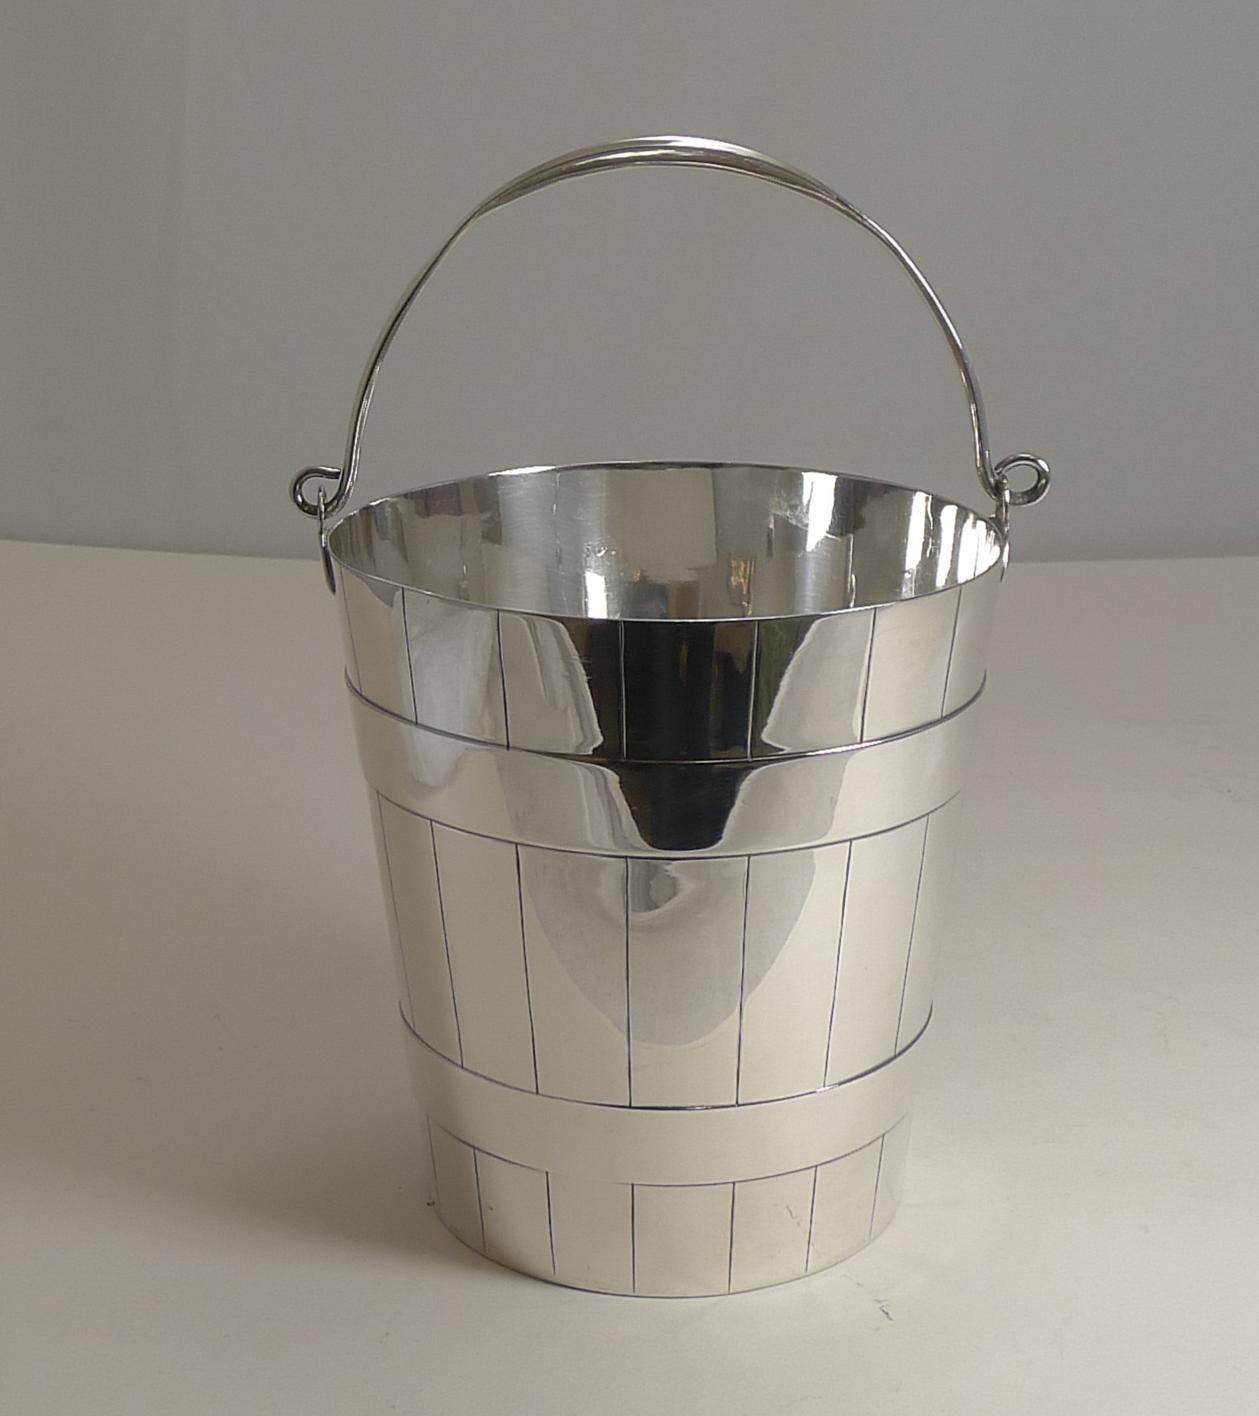 A handsome ice bucket or pail, in the form of a coopered bucket with a folding swing handle.

The original drainer is intact, sitting inside on a little ridge allowing any melted ice to fall through to the base, keeping the ice dry.

The